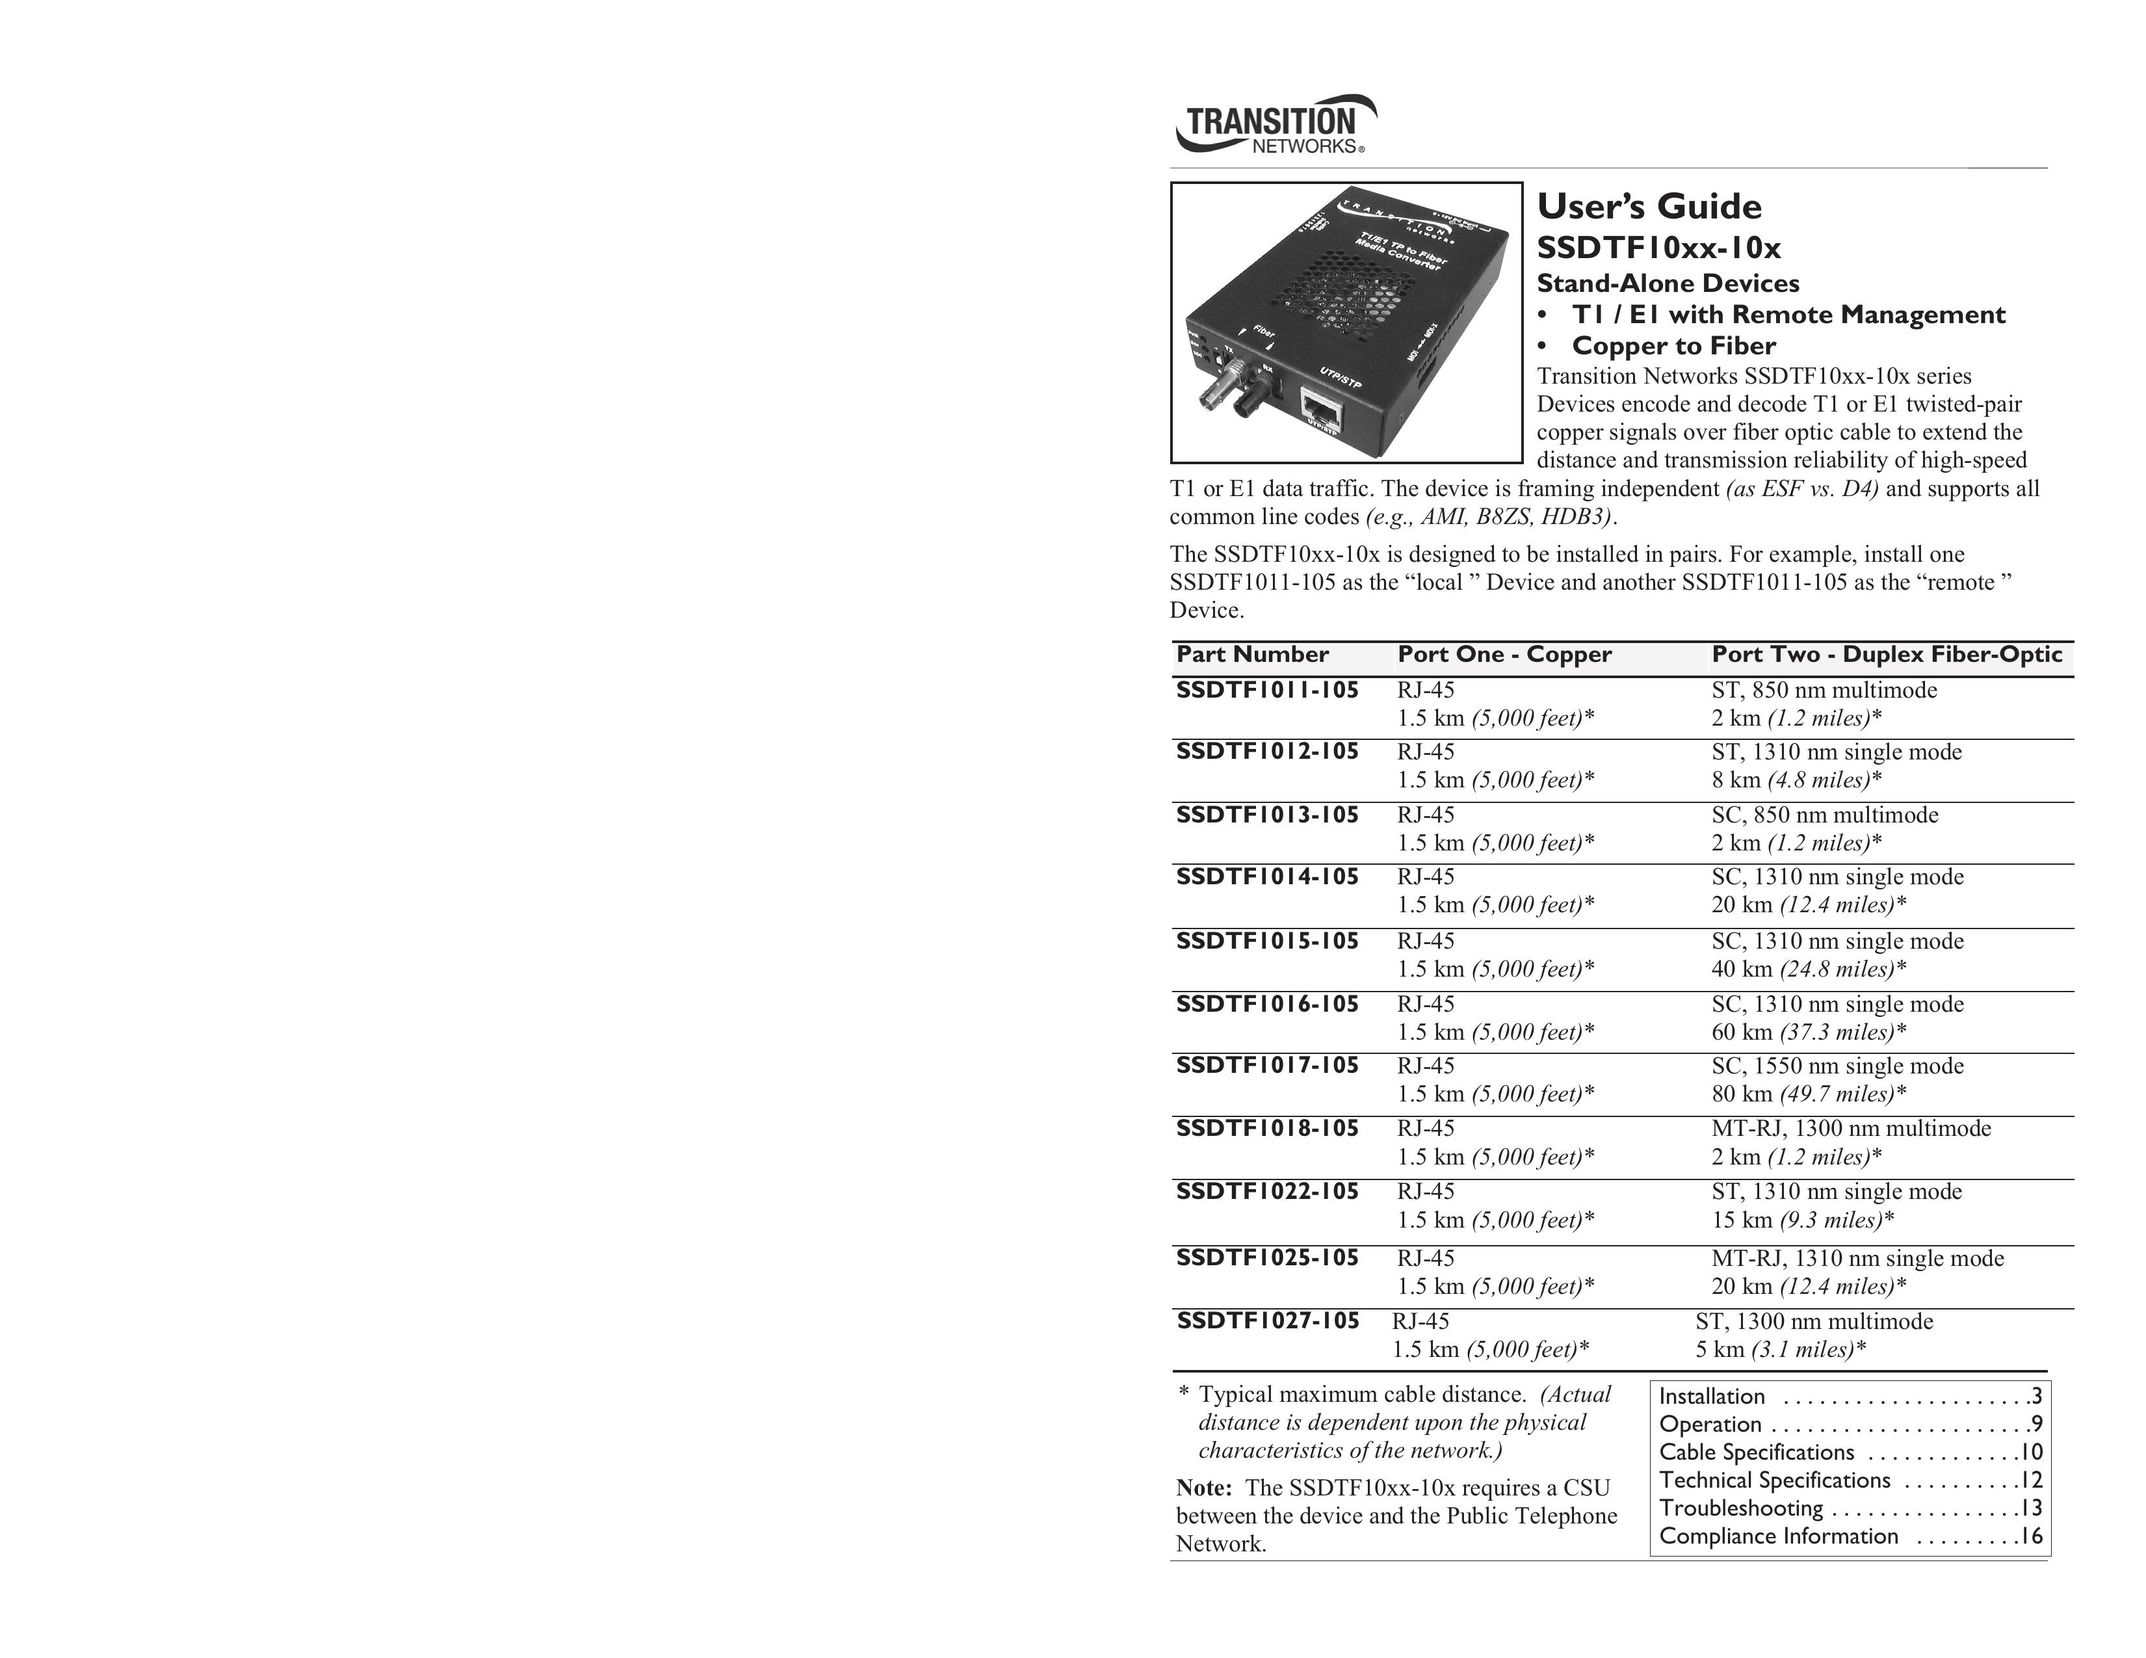 Transition Networks SSDTF1029-106 Network Card User Manual